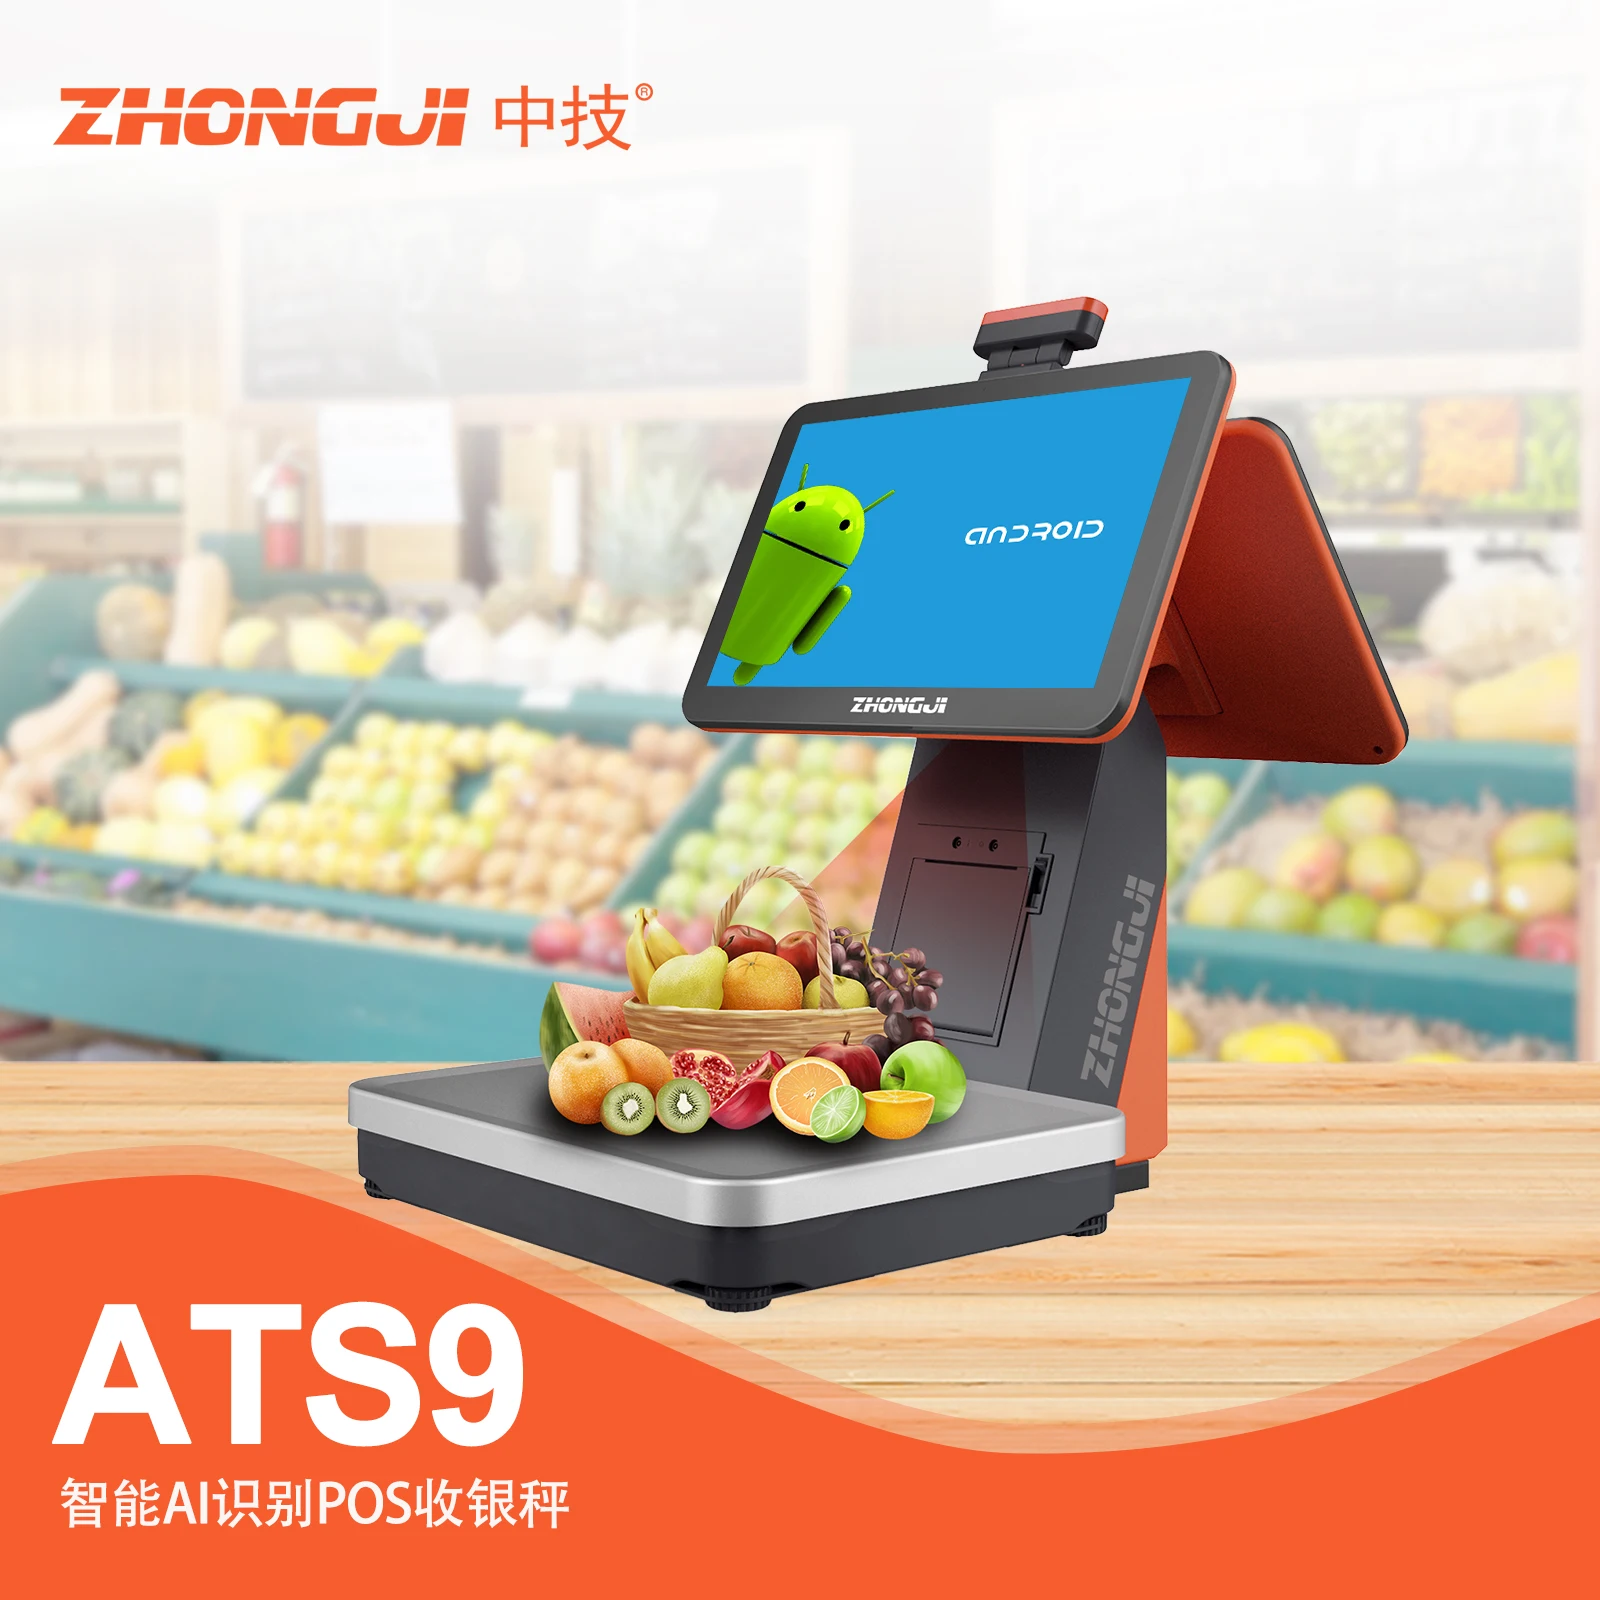 Pos system scale with printer and software retail all in one cash register